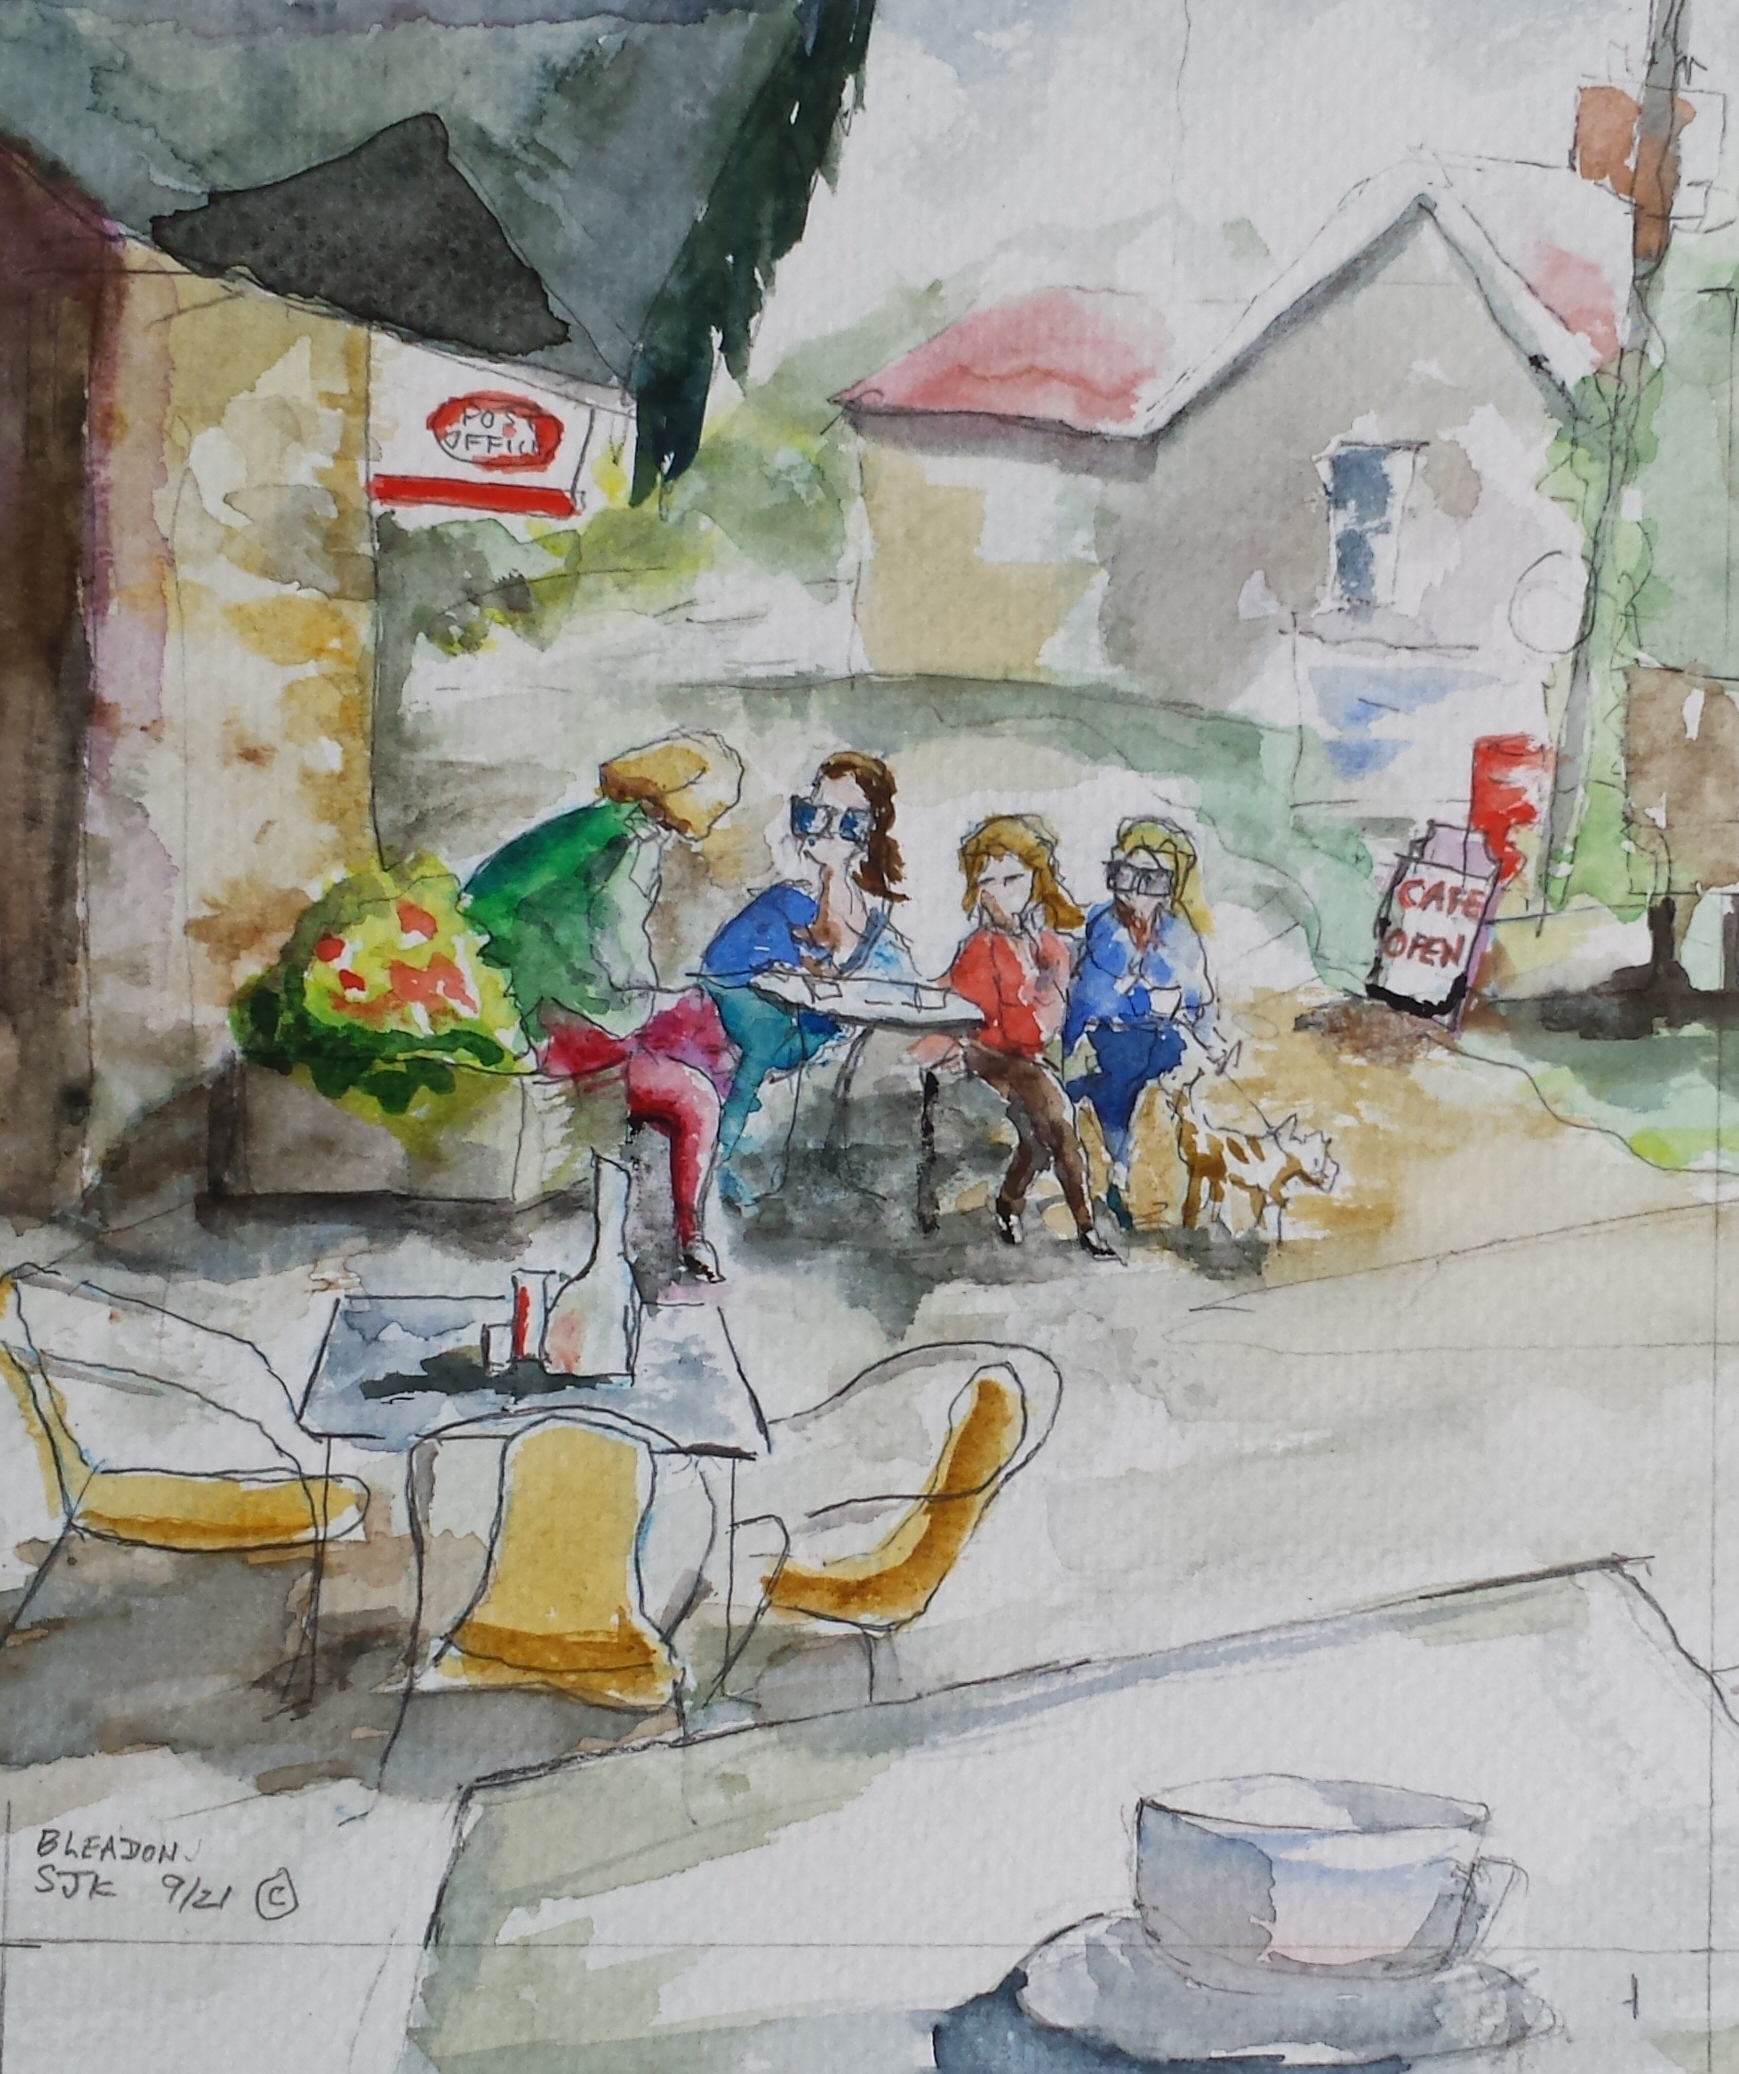 Let's sit in the sun and chat - Painting No 201